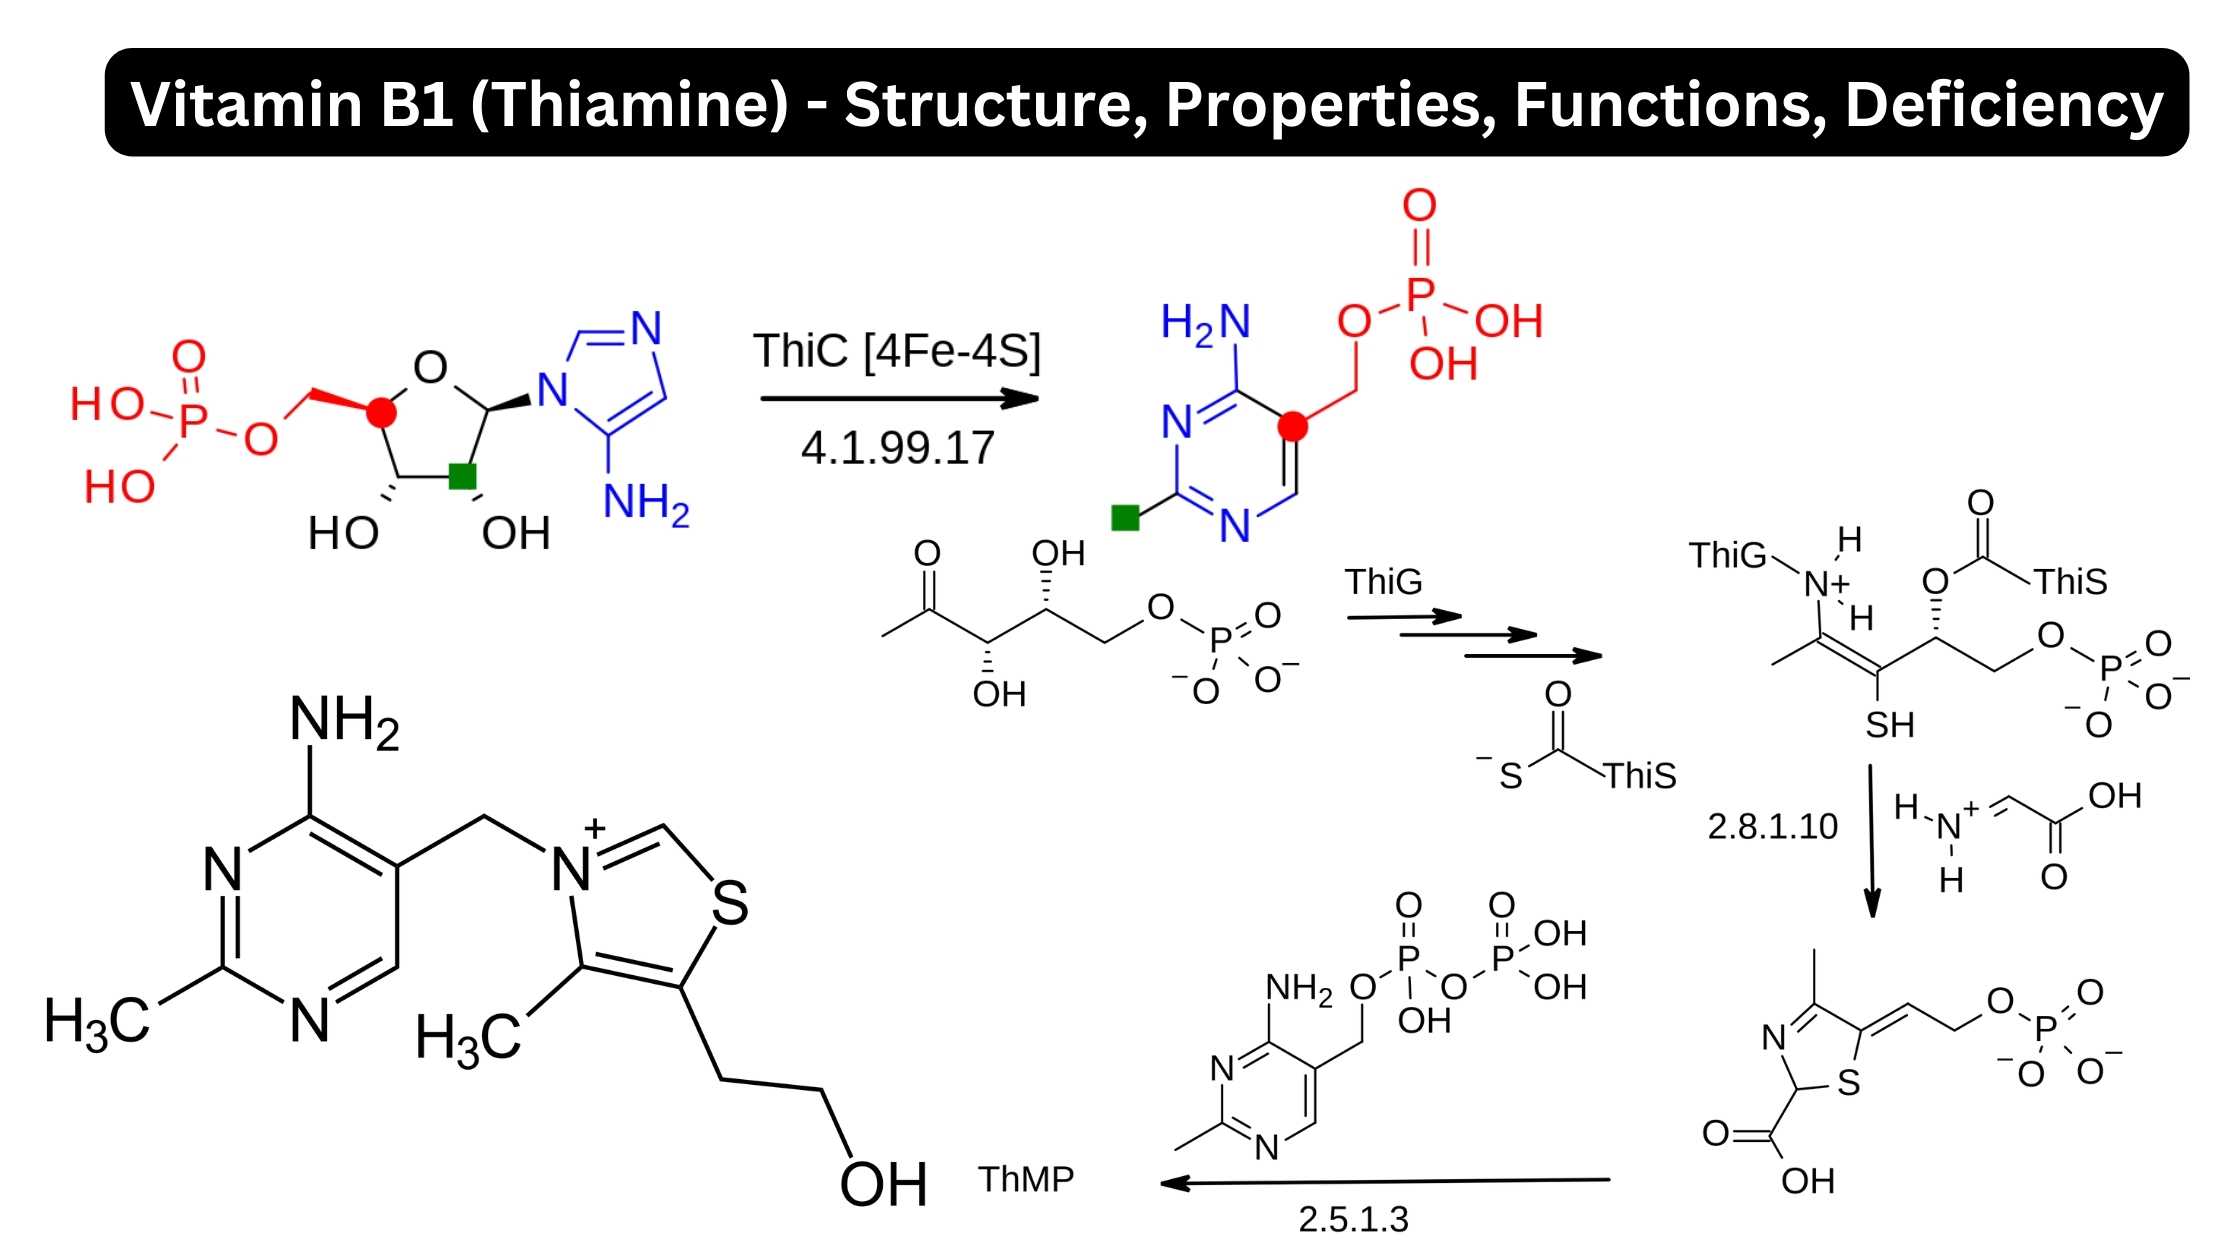 Vitamin B1 (Thiamine) - Structure, Properties, Functions, Deficiency